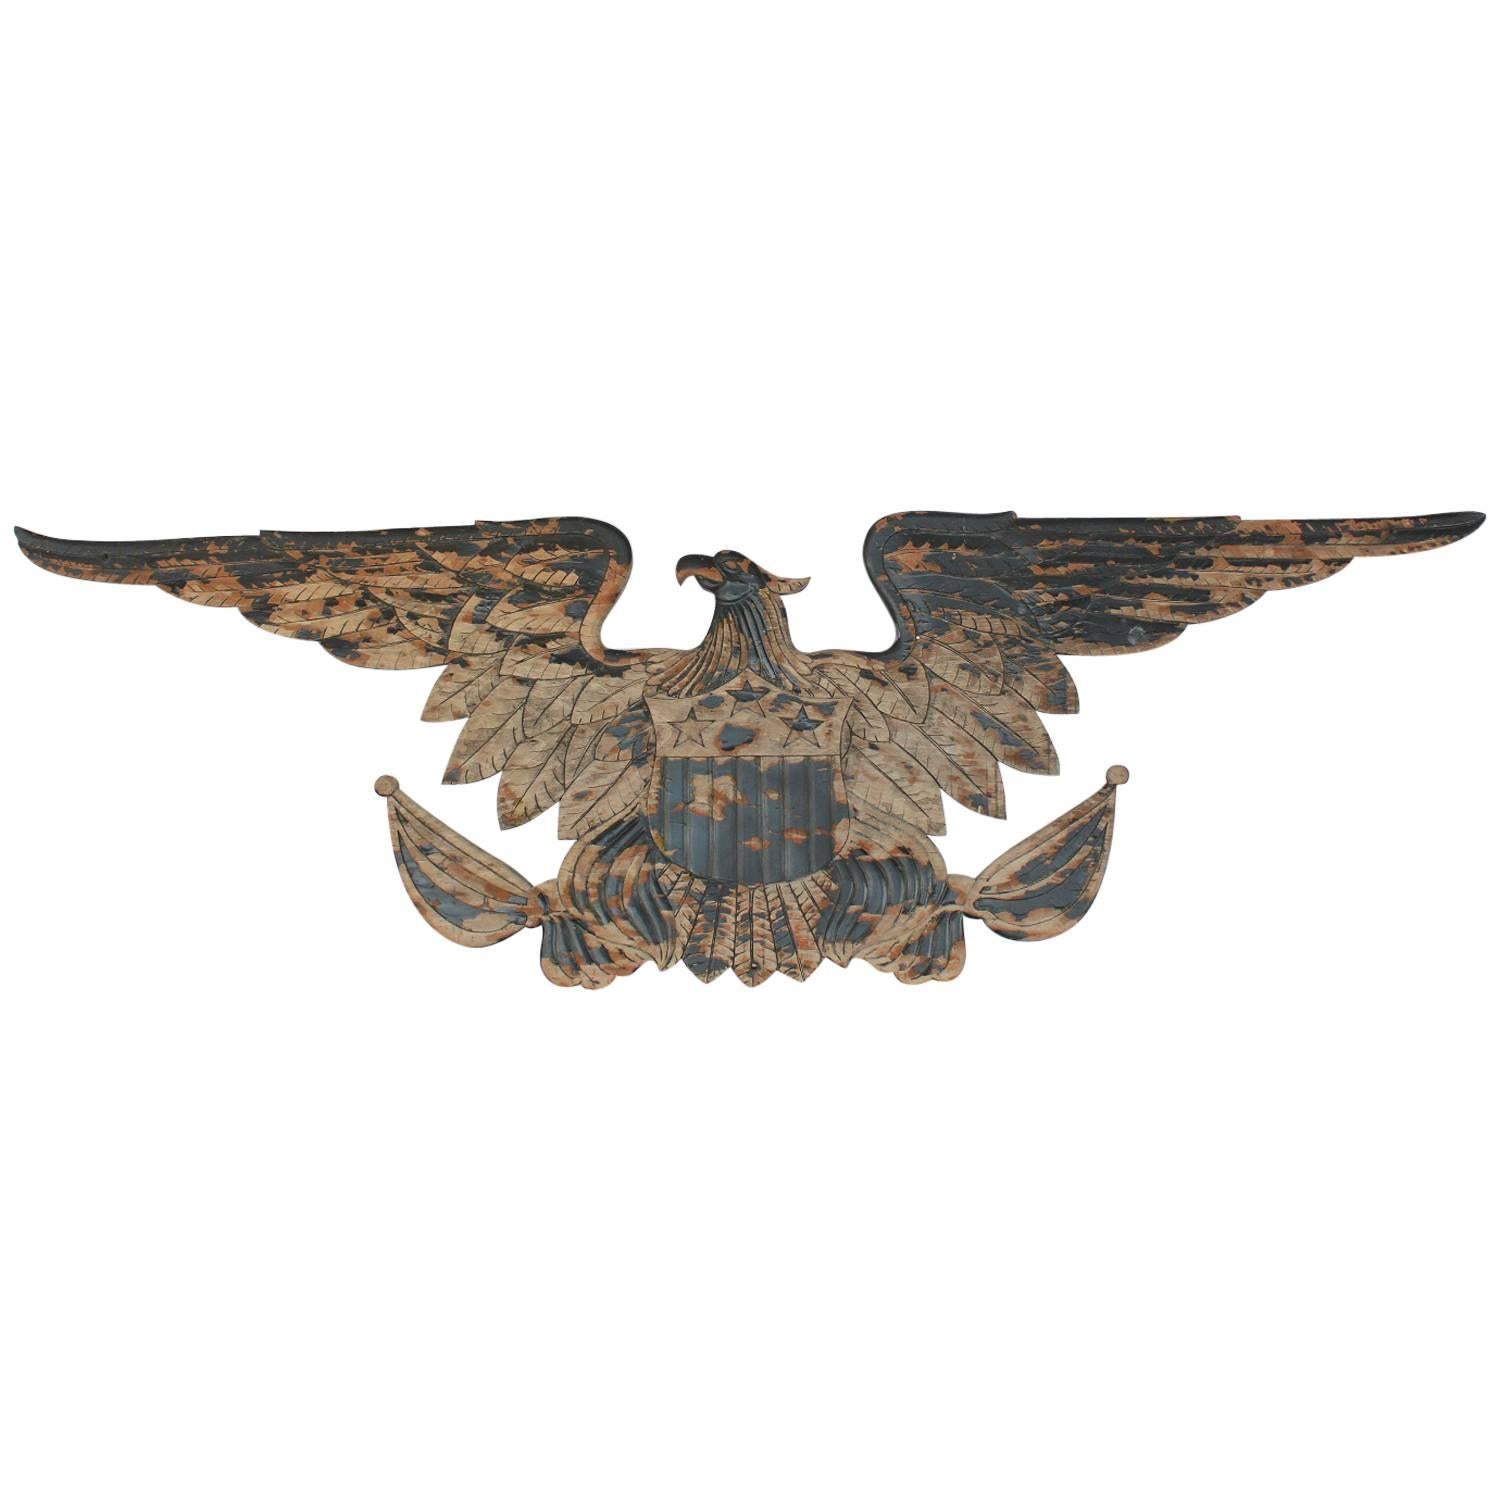 Late 19th Century American Hand-Carved Wood Eagle